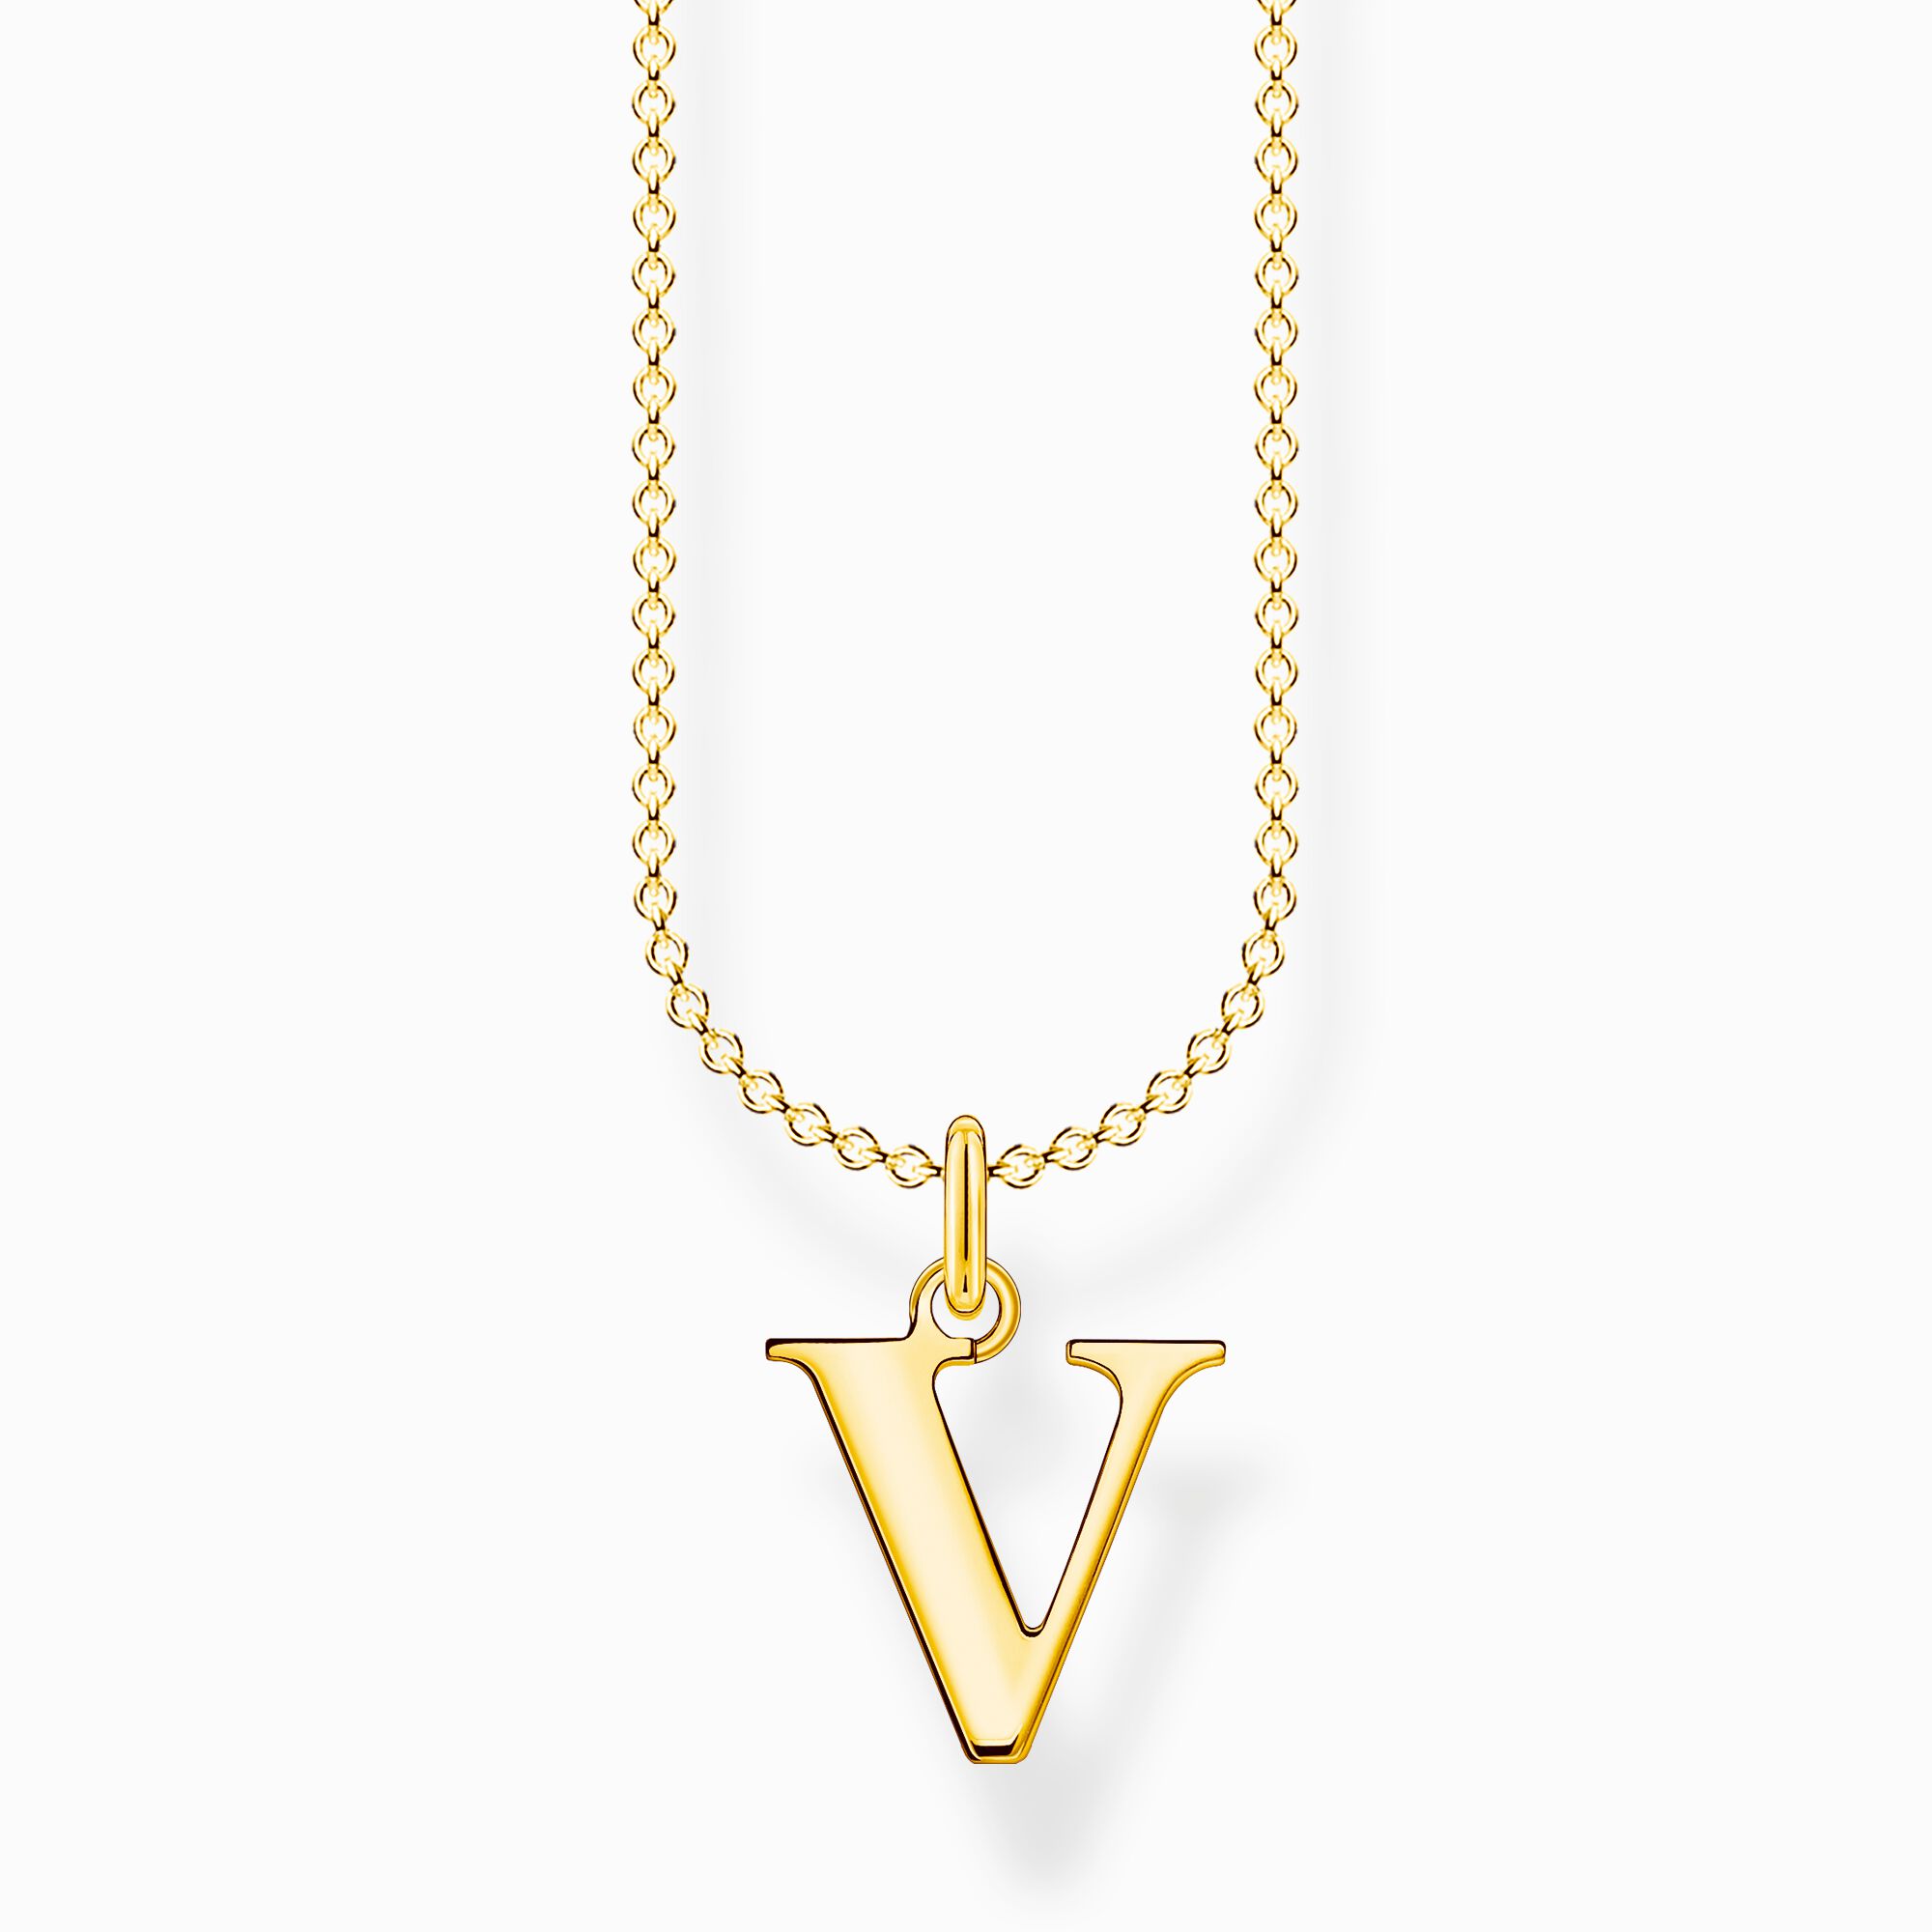 Necklace letter v gold from the Charming Collection collection in the THOMAS SABO online store